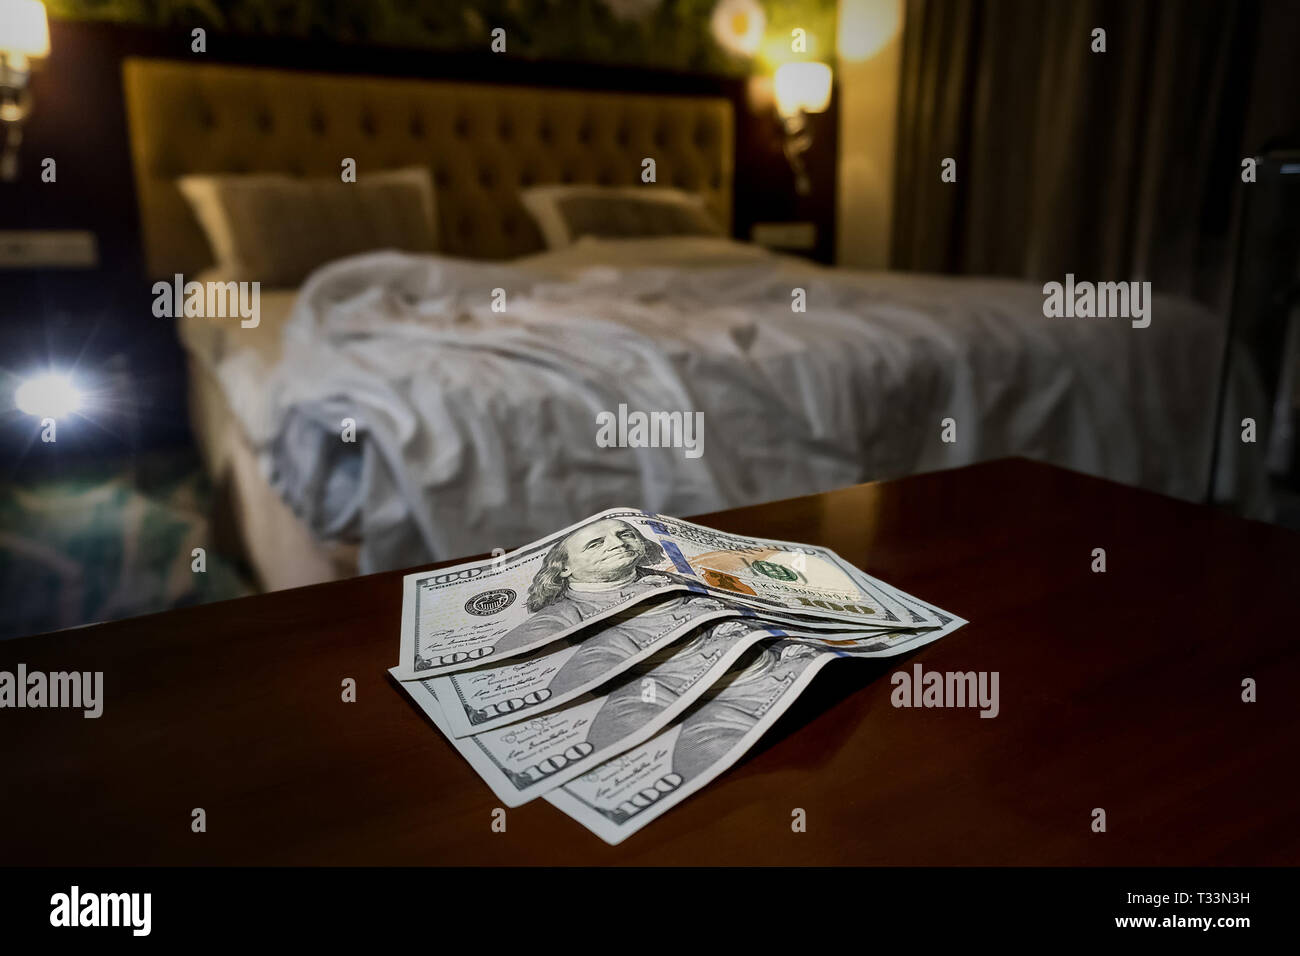 Tips at the bed for the housekeeper in hotel. Stock Photo